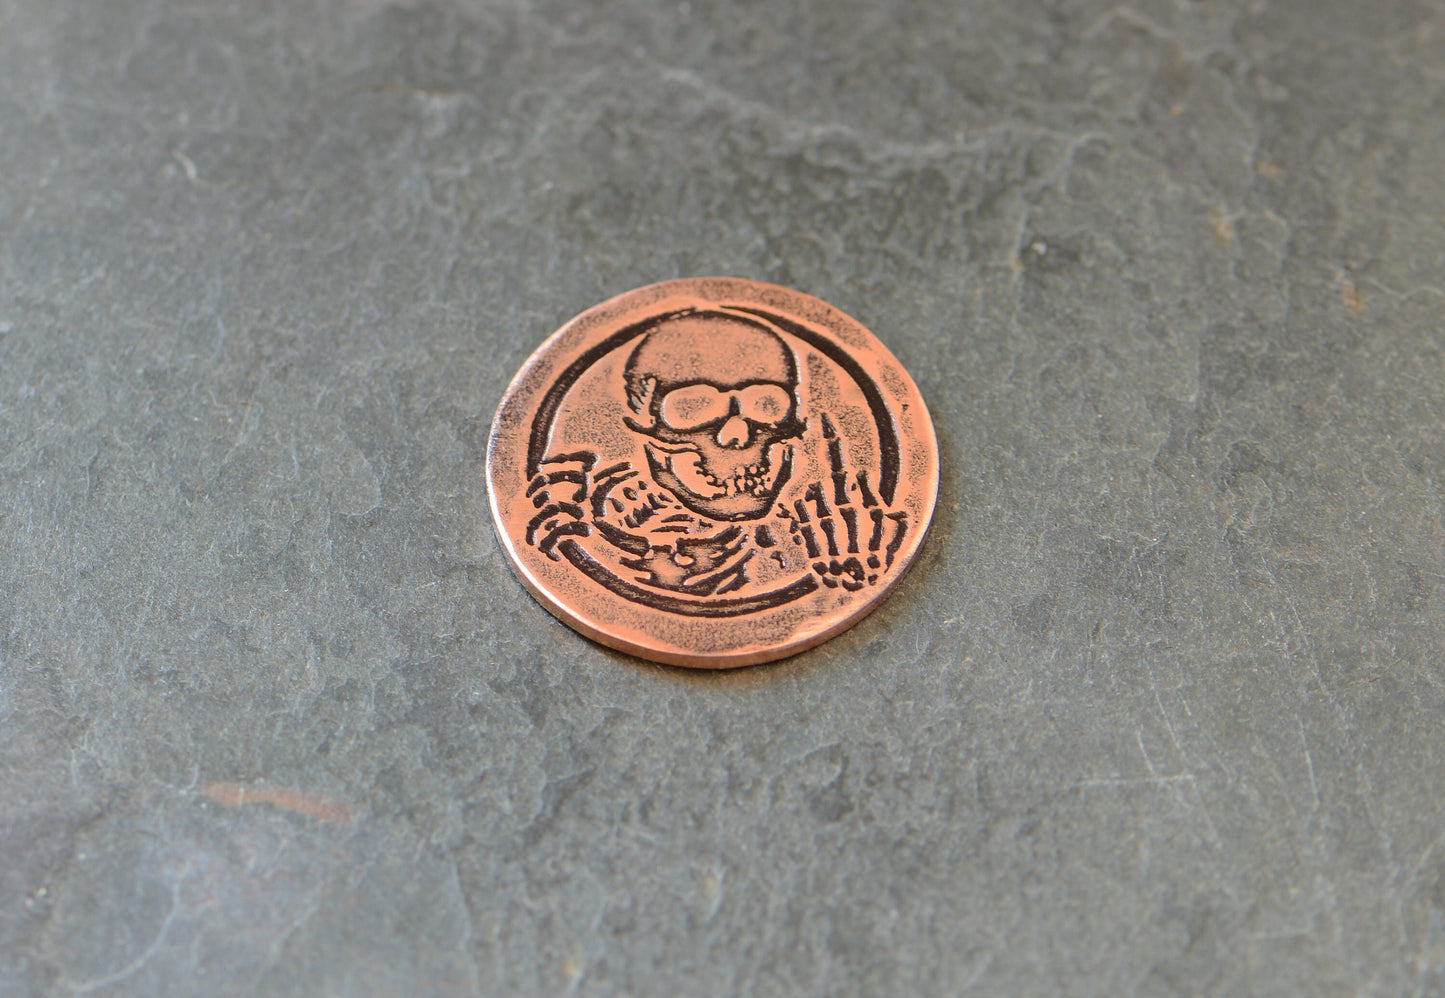 copper golf ball marker with skeleton and middle finger - Lottery scratcher - copper token - flipping the bird